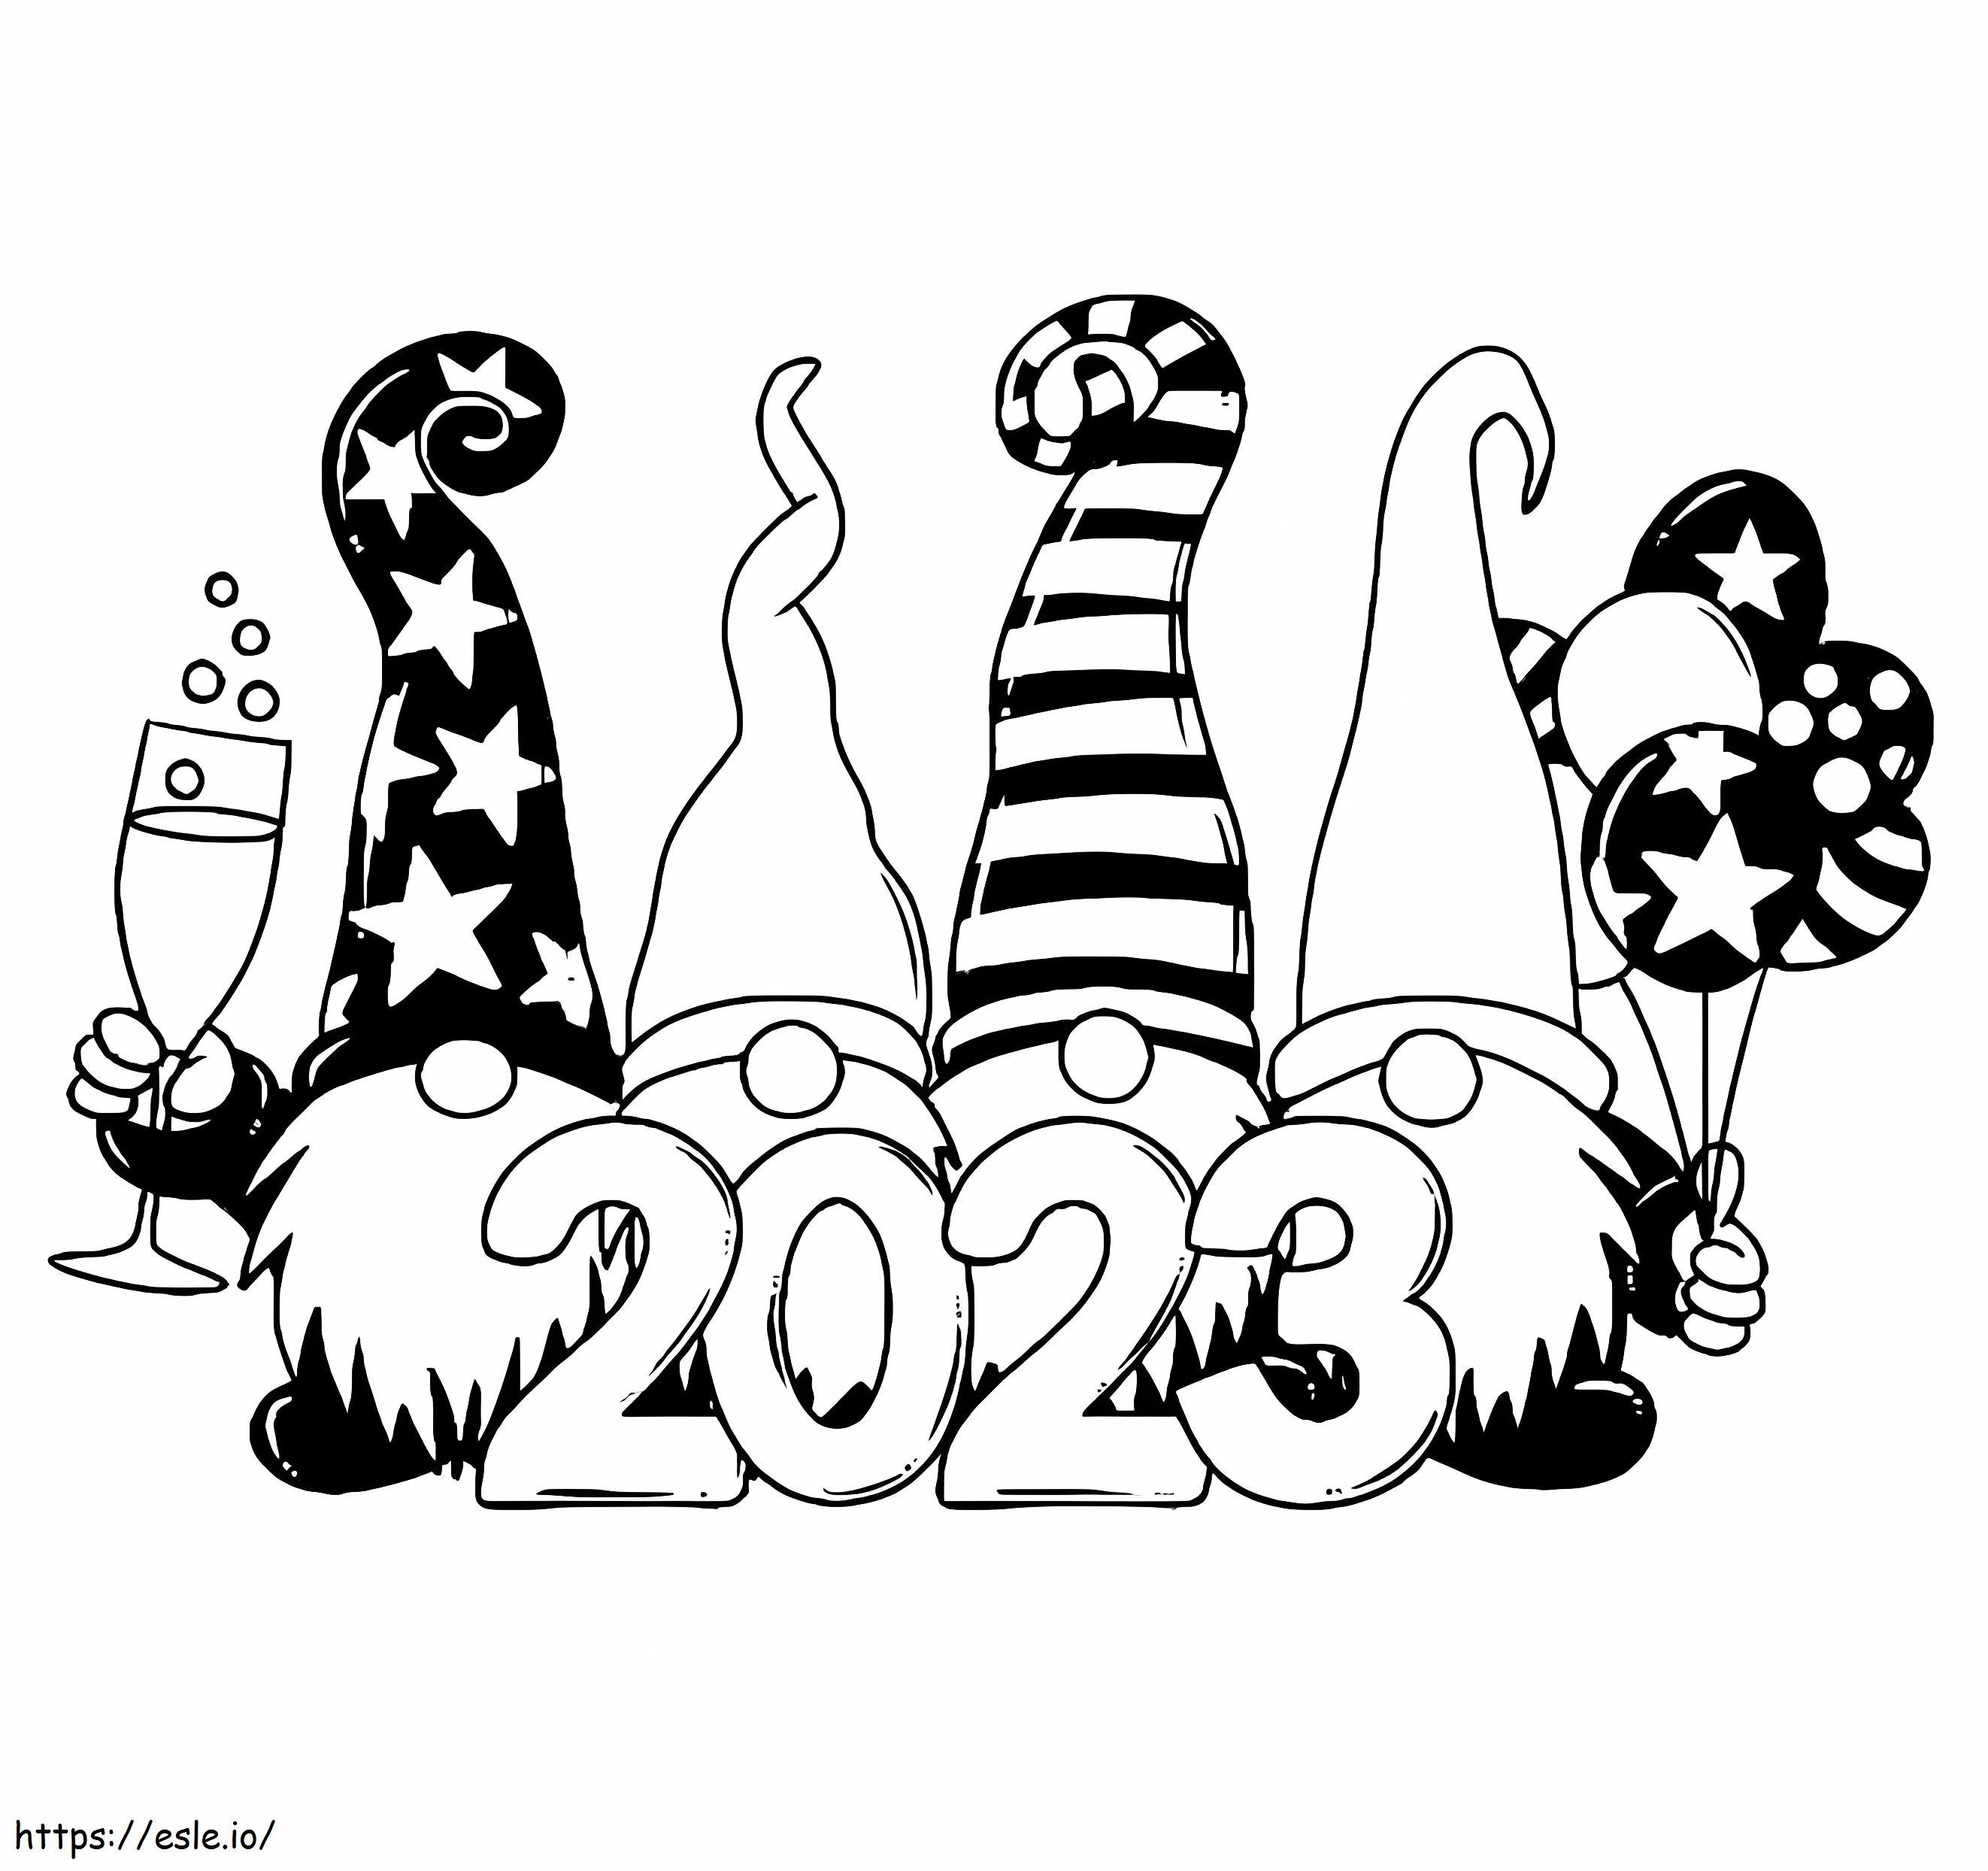 2023 With Gnomes coloring page